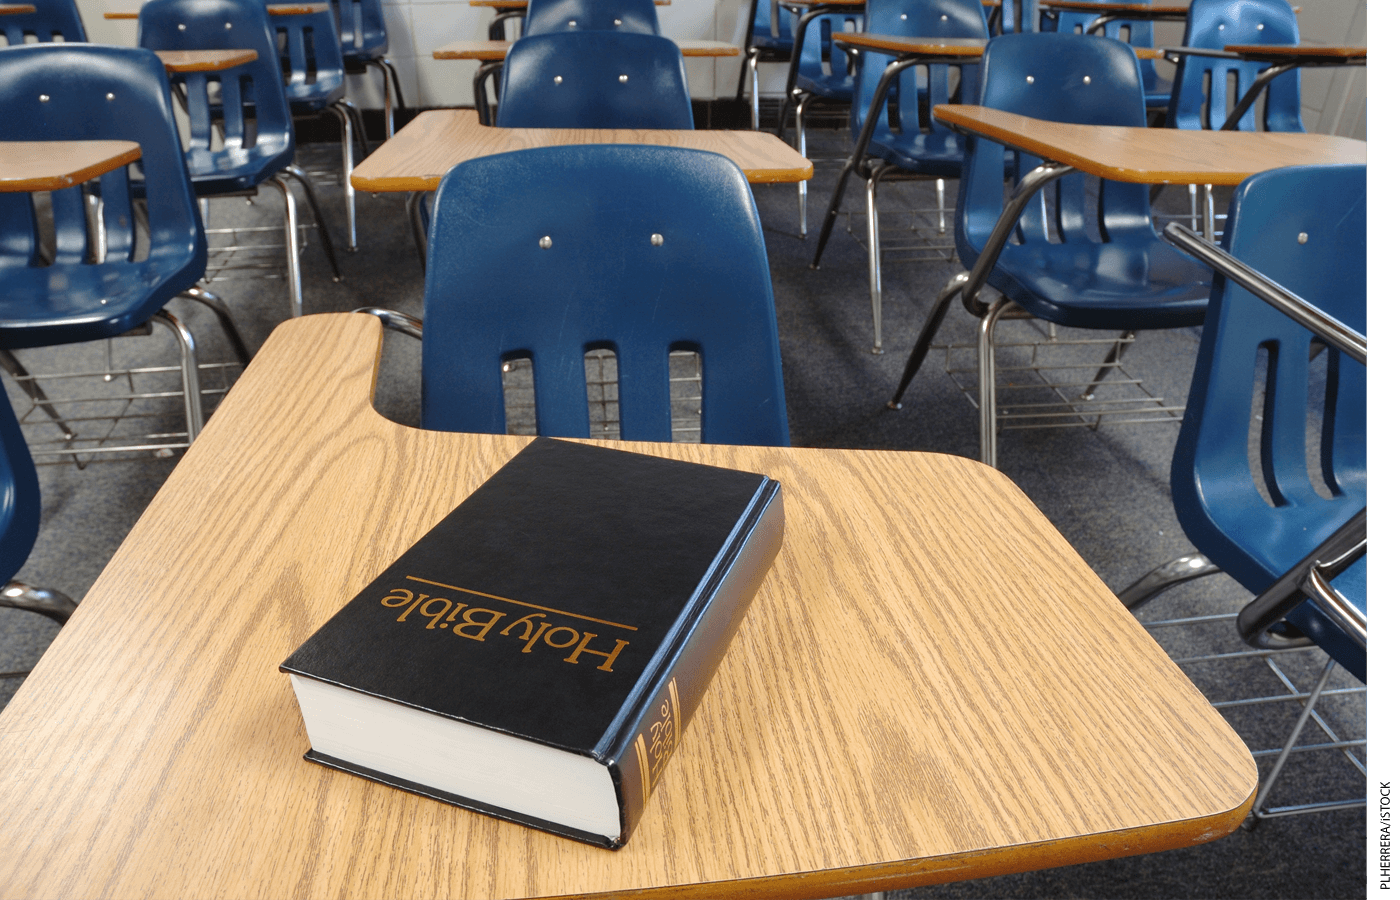 A Holy Bible rests on a school desk